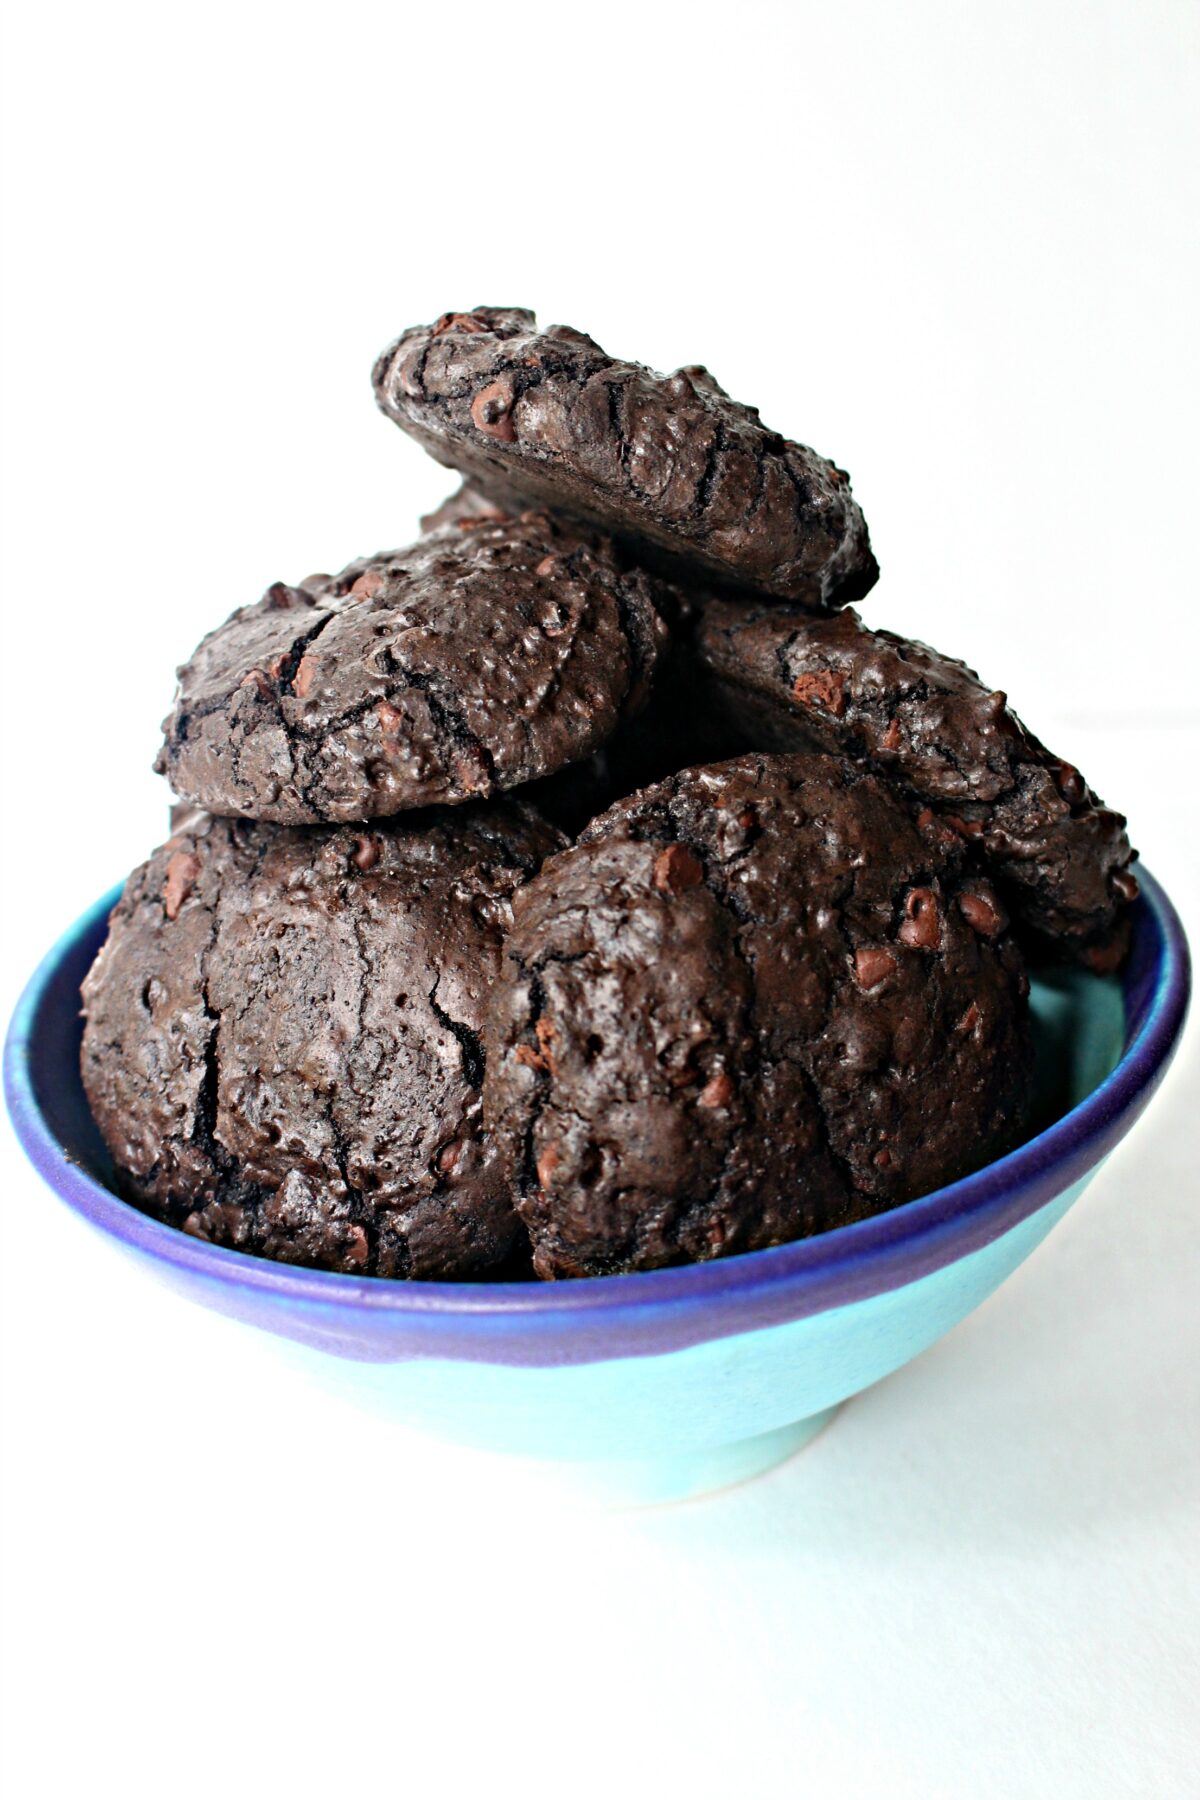 Thick, dark chocolate cookies piled in a blue bowl..